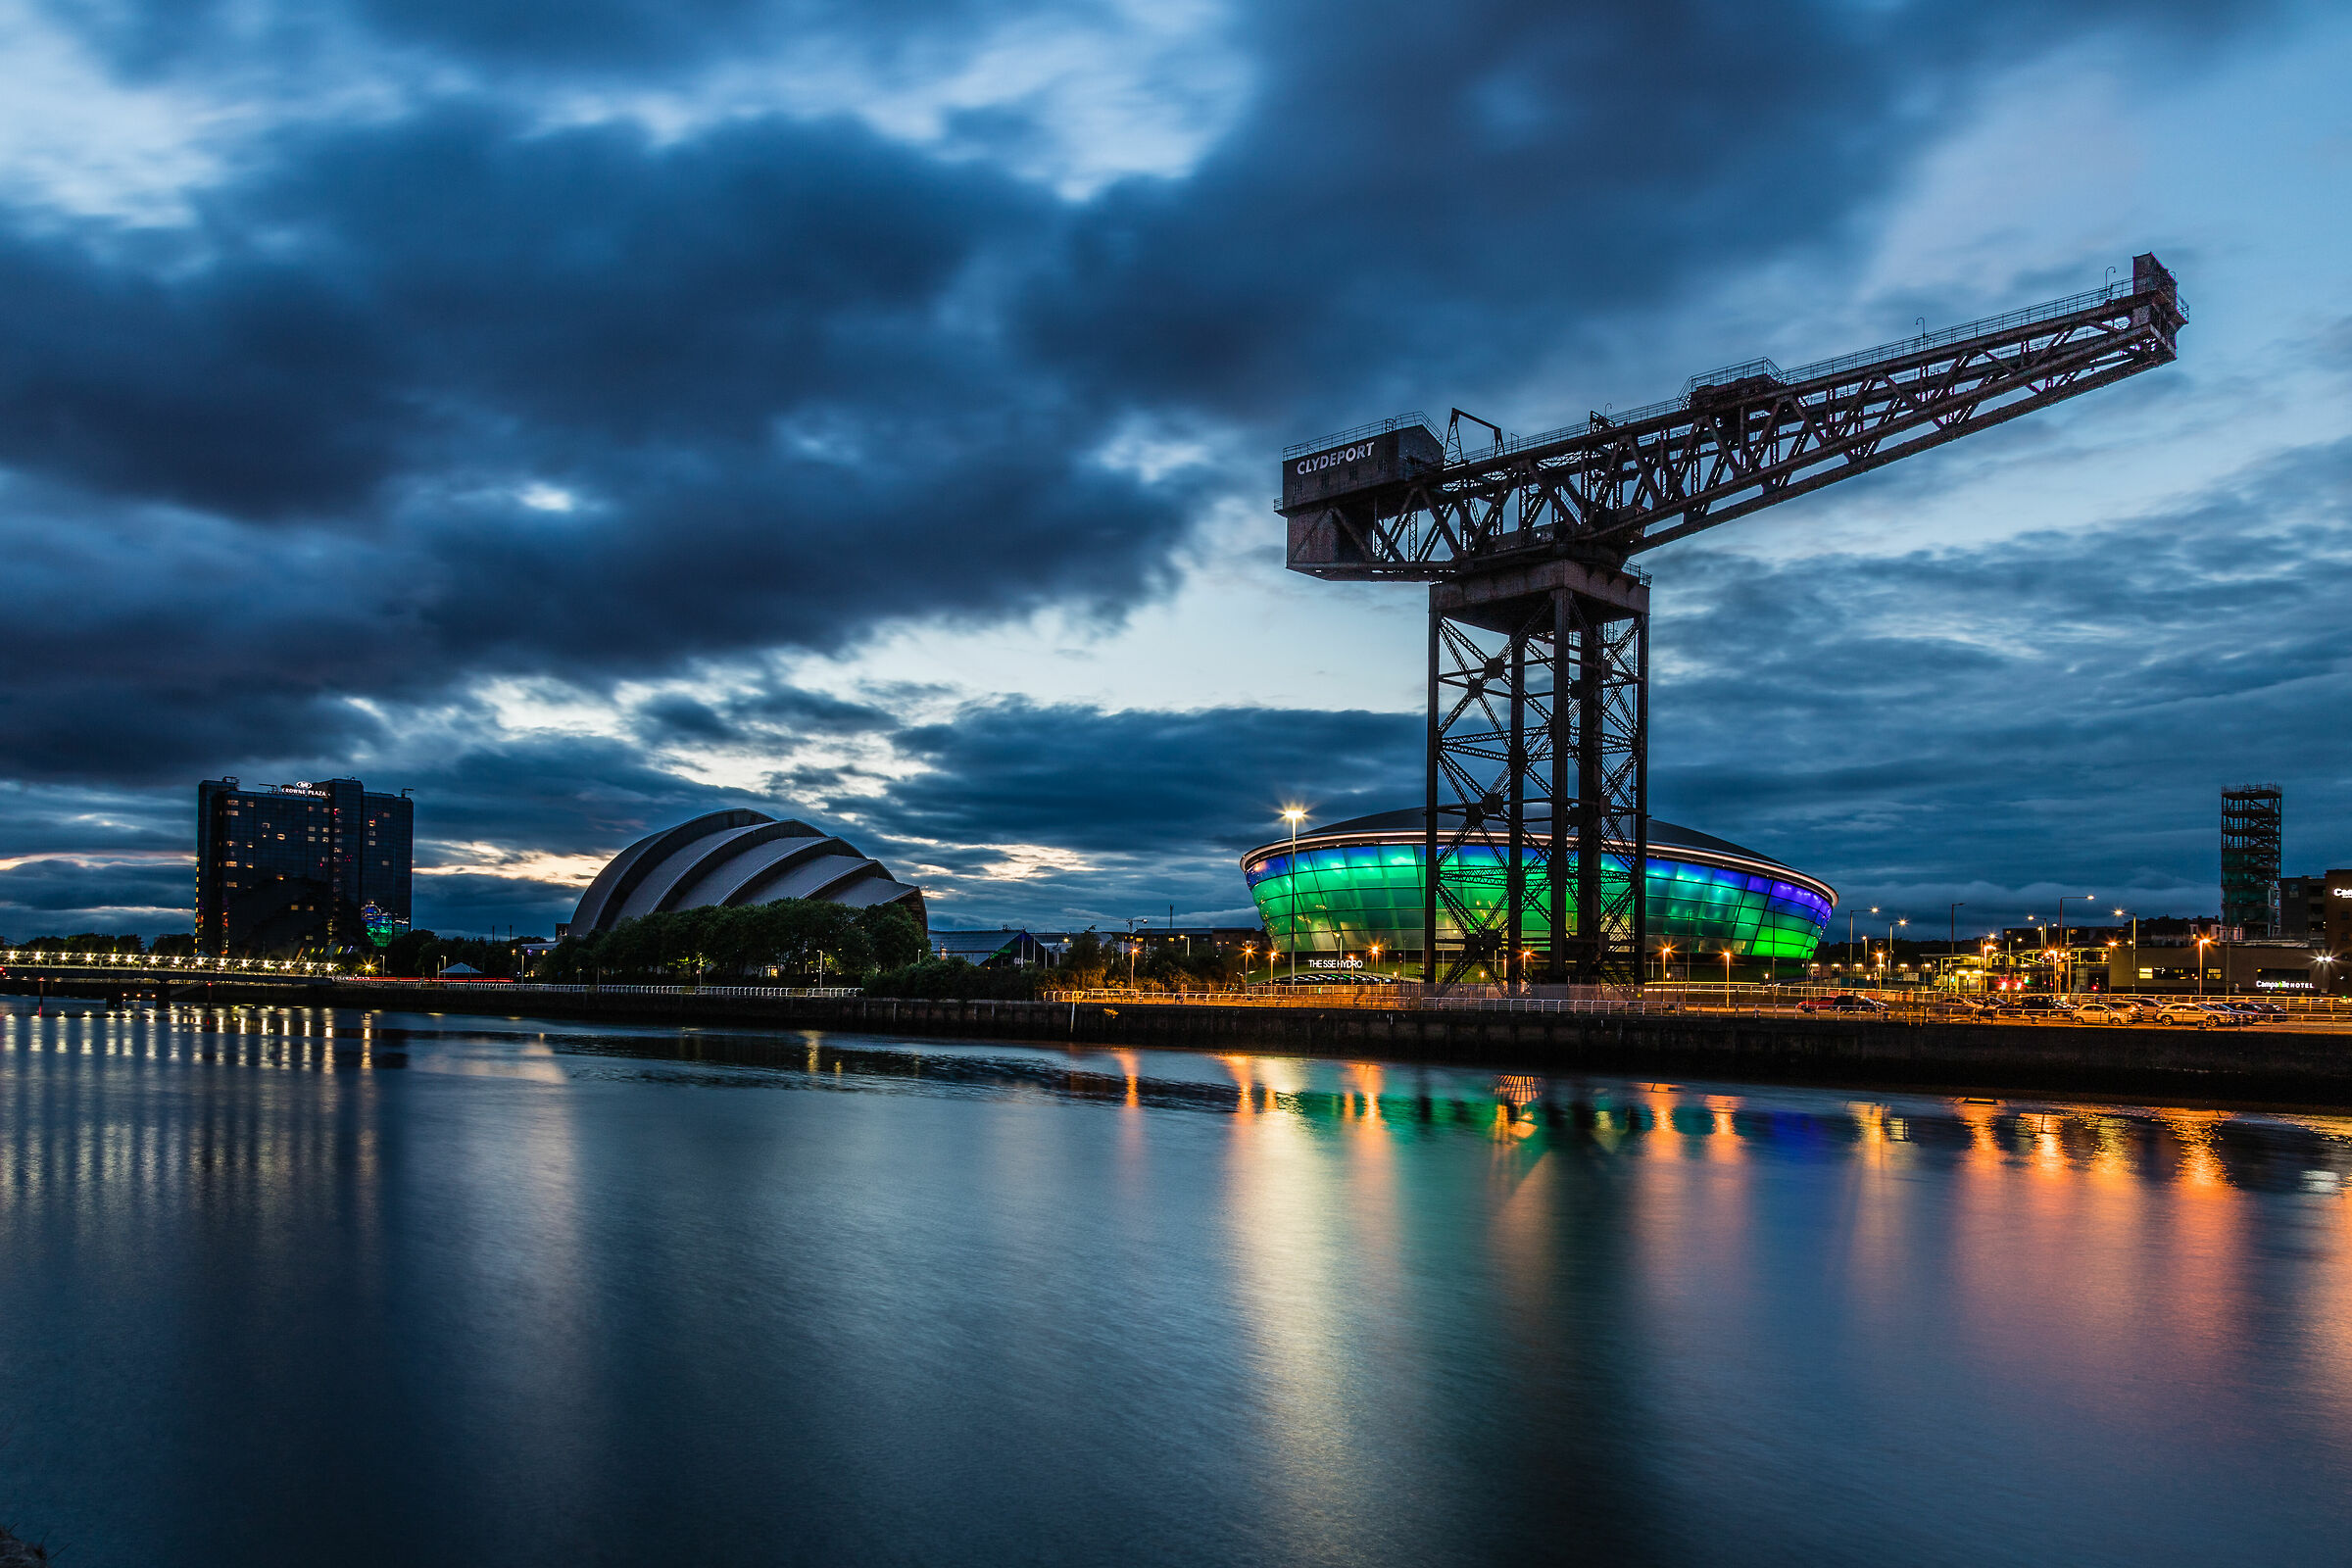 Blue Hour at River Clyde-Glasgow...